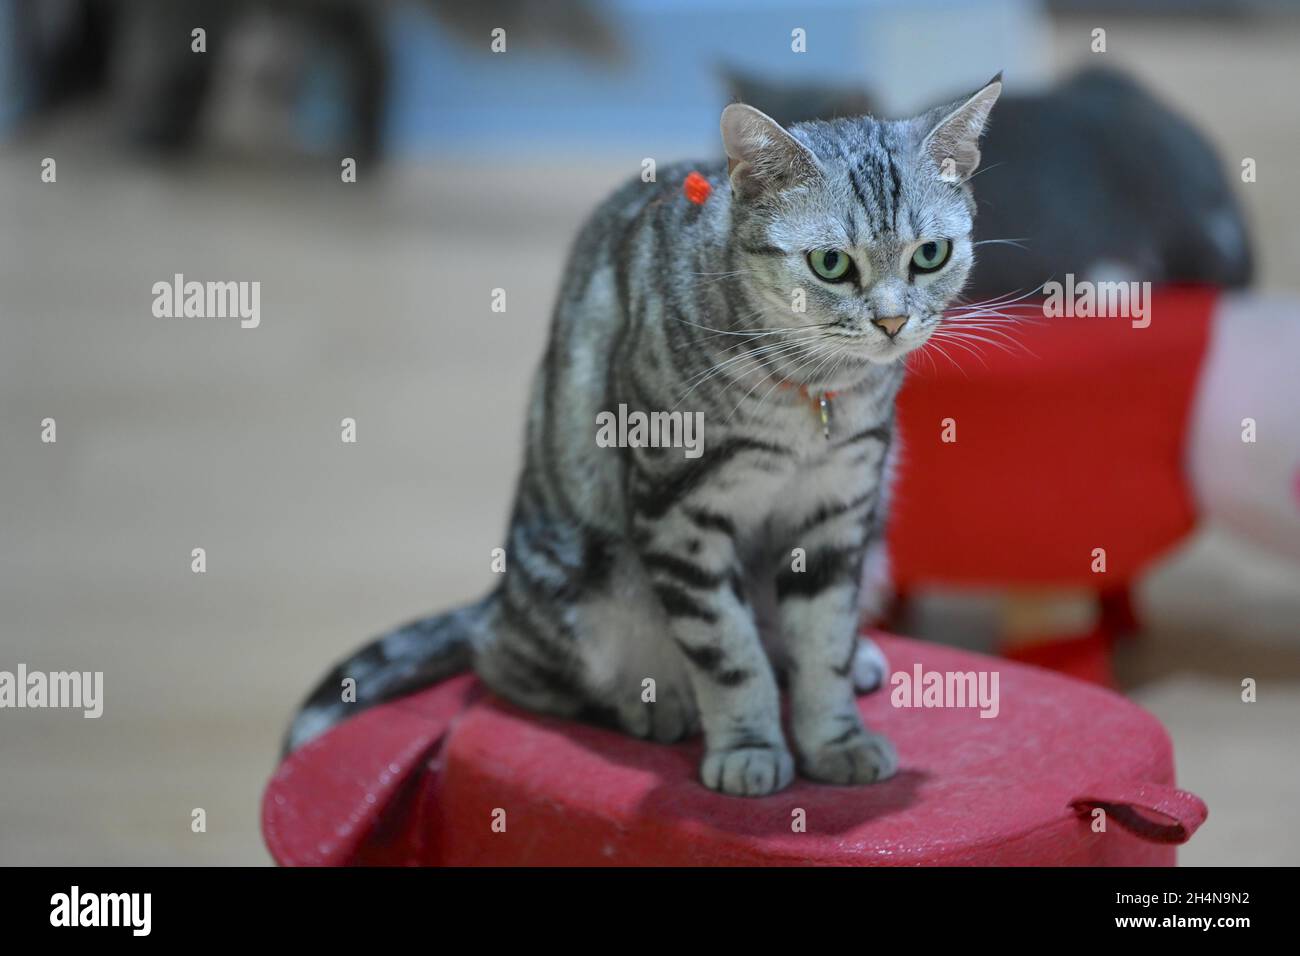 NANNING, CHINA - NOVEMBER 2, 2021 - More than 40 cats pose in different poses at the first cat museum in Nanning, South China's Guangxi Zhuang Autonomous Region, Nov 2, 2021. All the cats in the museum are race-level purebred cats who undergo regular physical check-ups, cat triplets and rabies vaccines, and are washed and cleaned. (Photo by Li Dongping / Costfoto/Sipa USA) Stock Photo